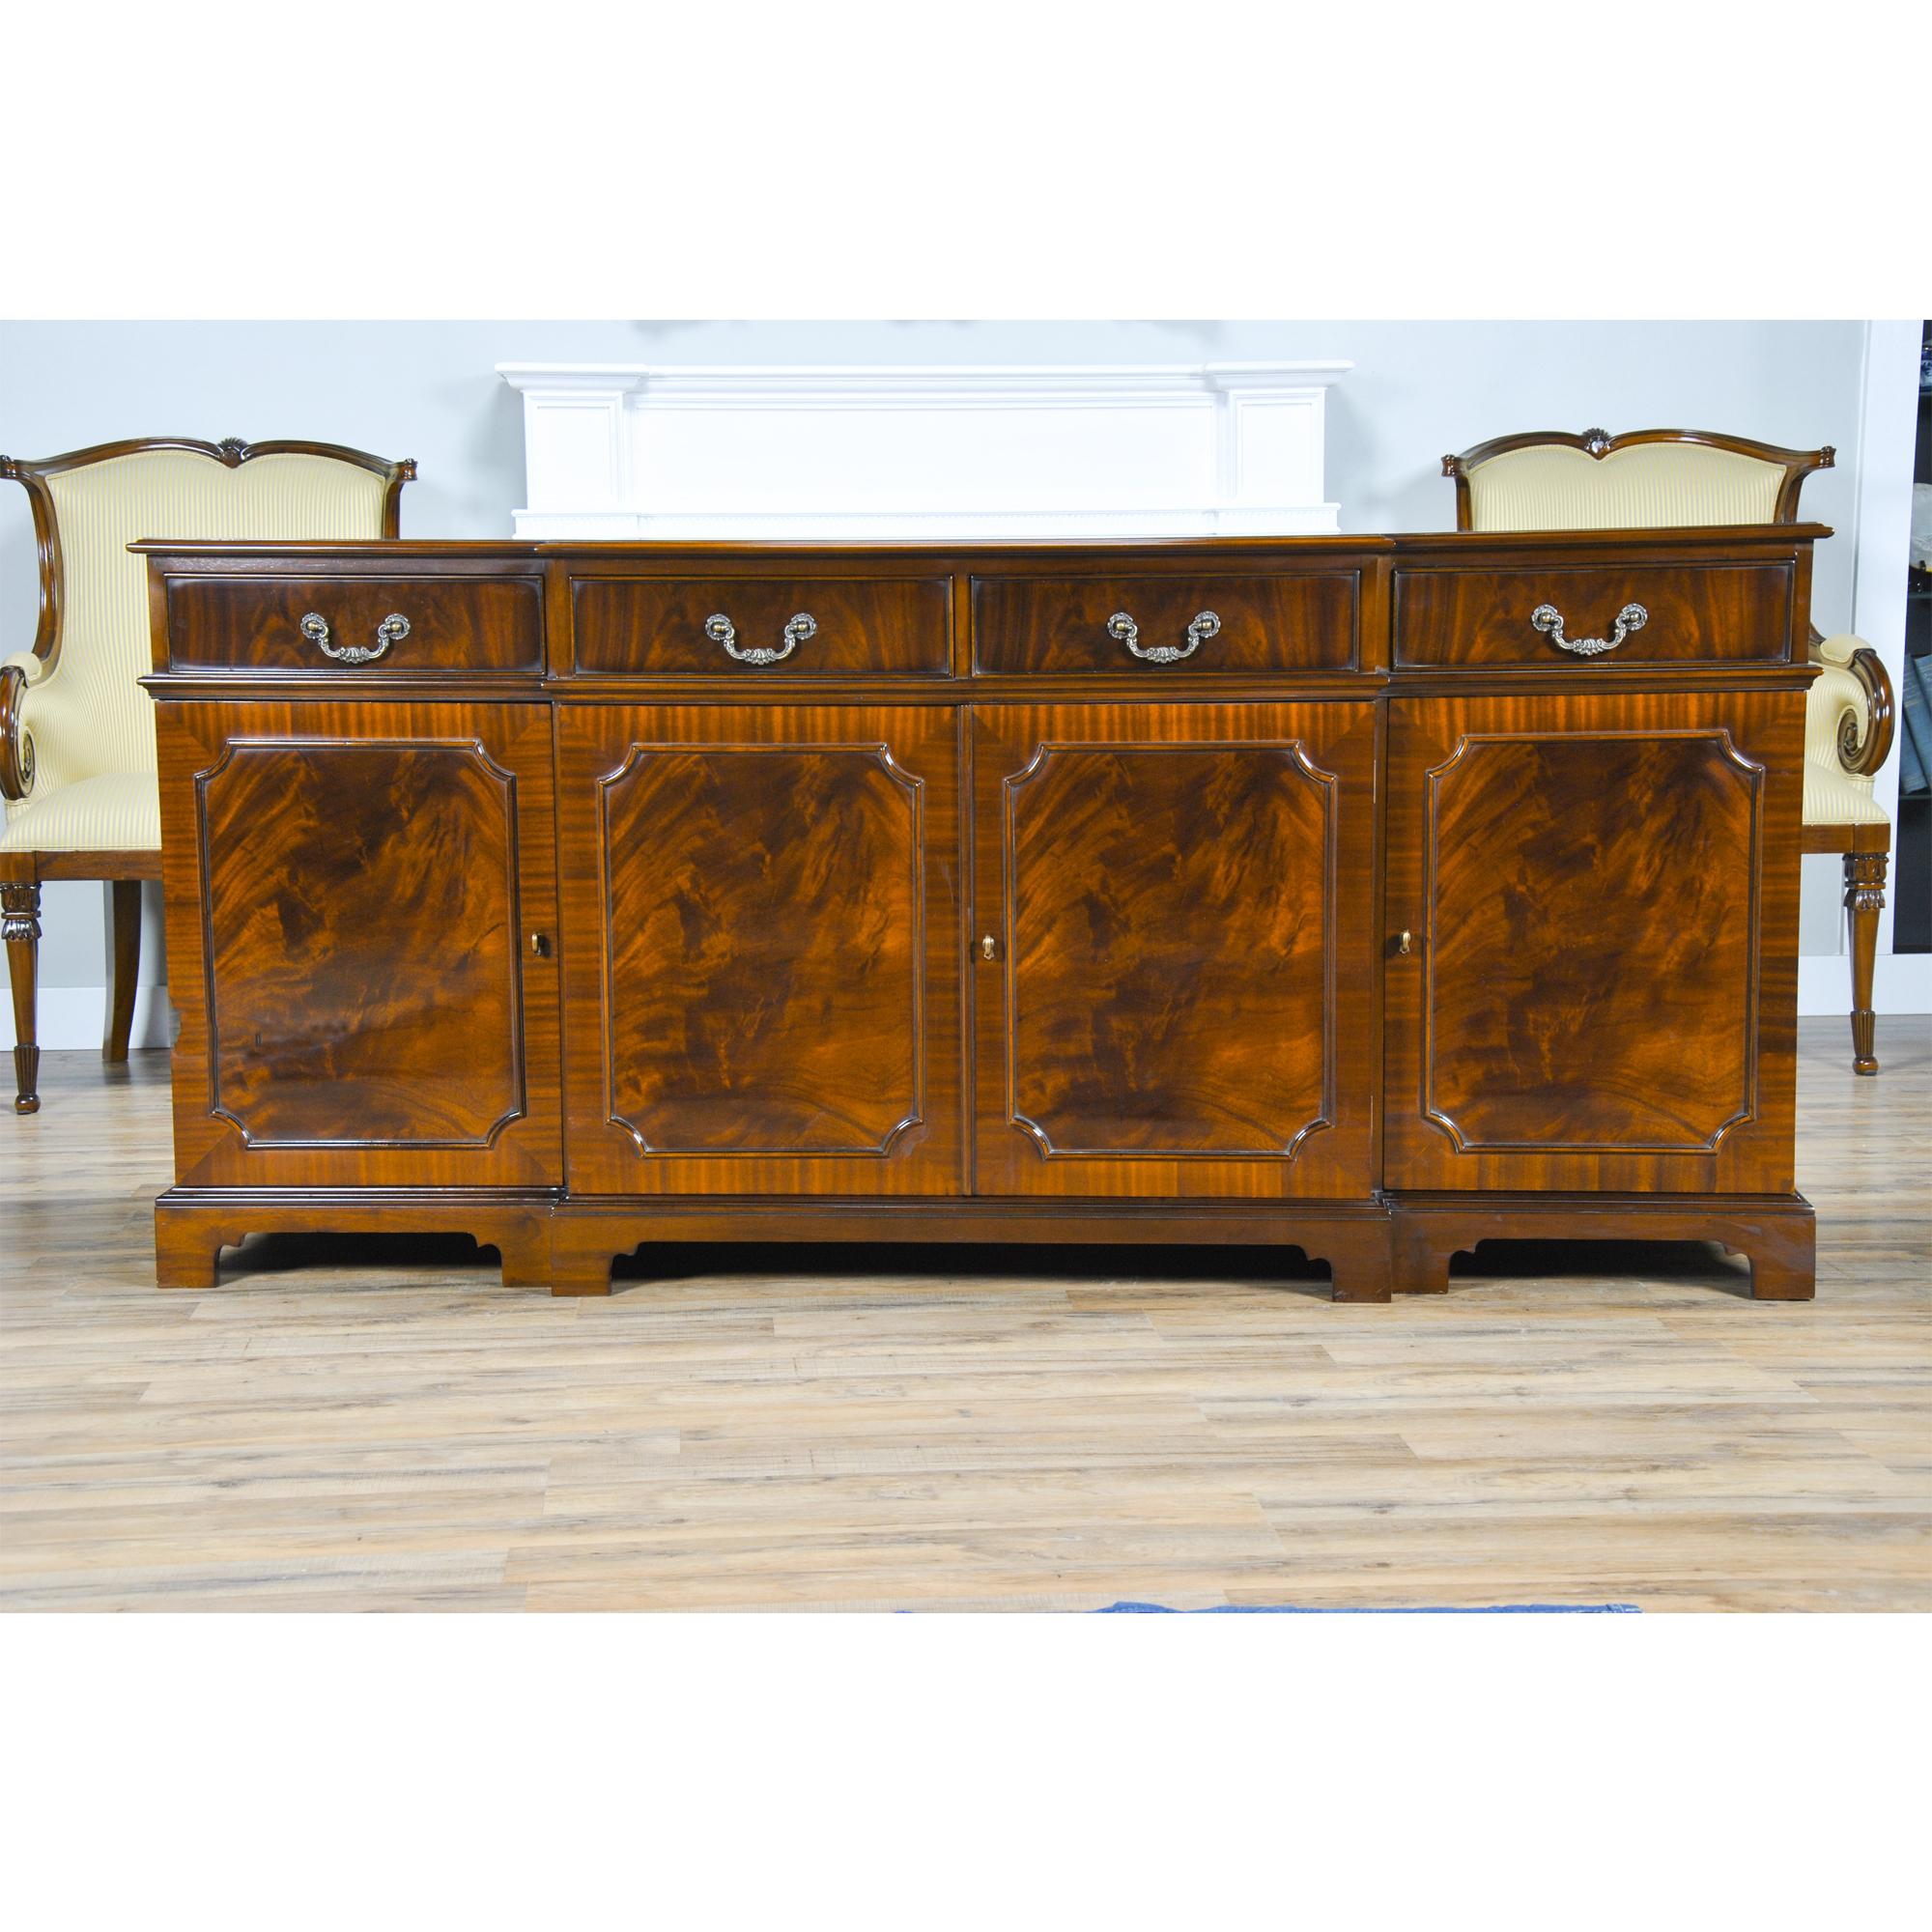 This Mahogany Sideboard or buffet from Niagara Furniture has a great amount of storage space. Produced using the finest quality veneers and solid mahogany woods this item is a perfect compliment to several of our breakfront china closets which can